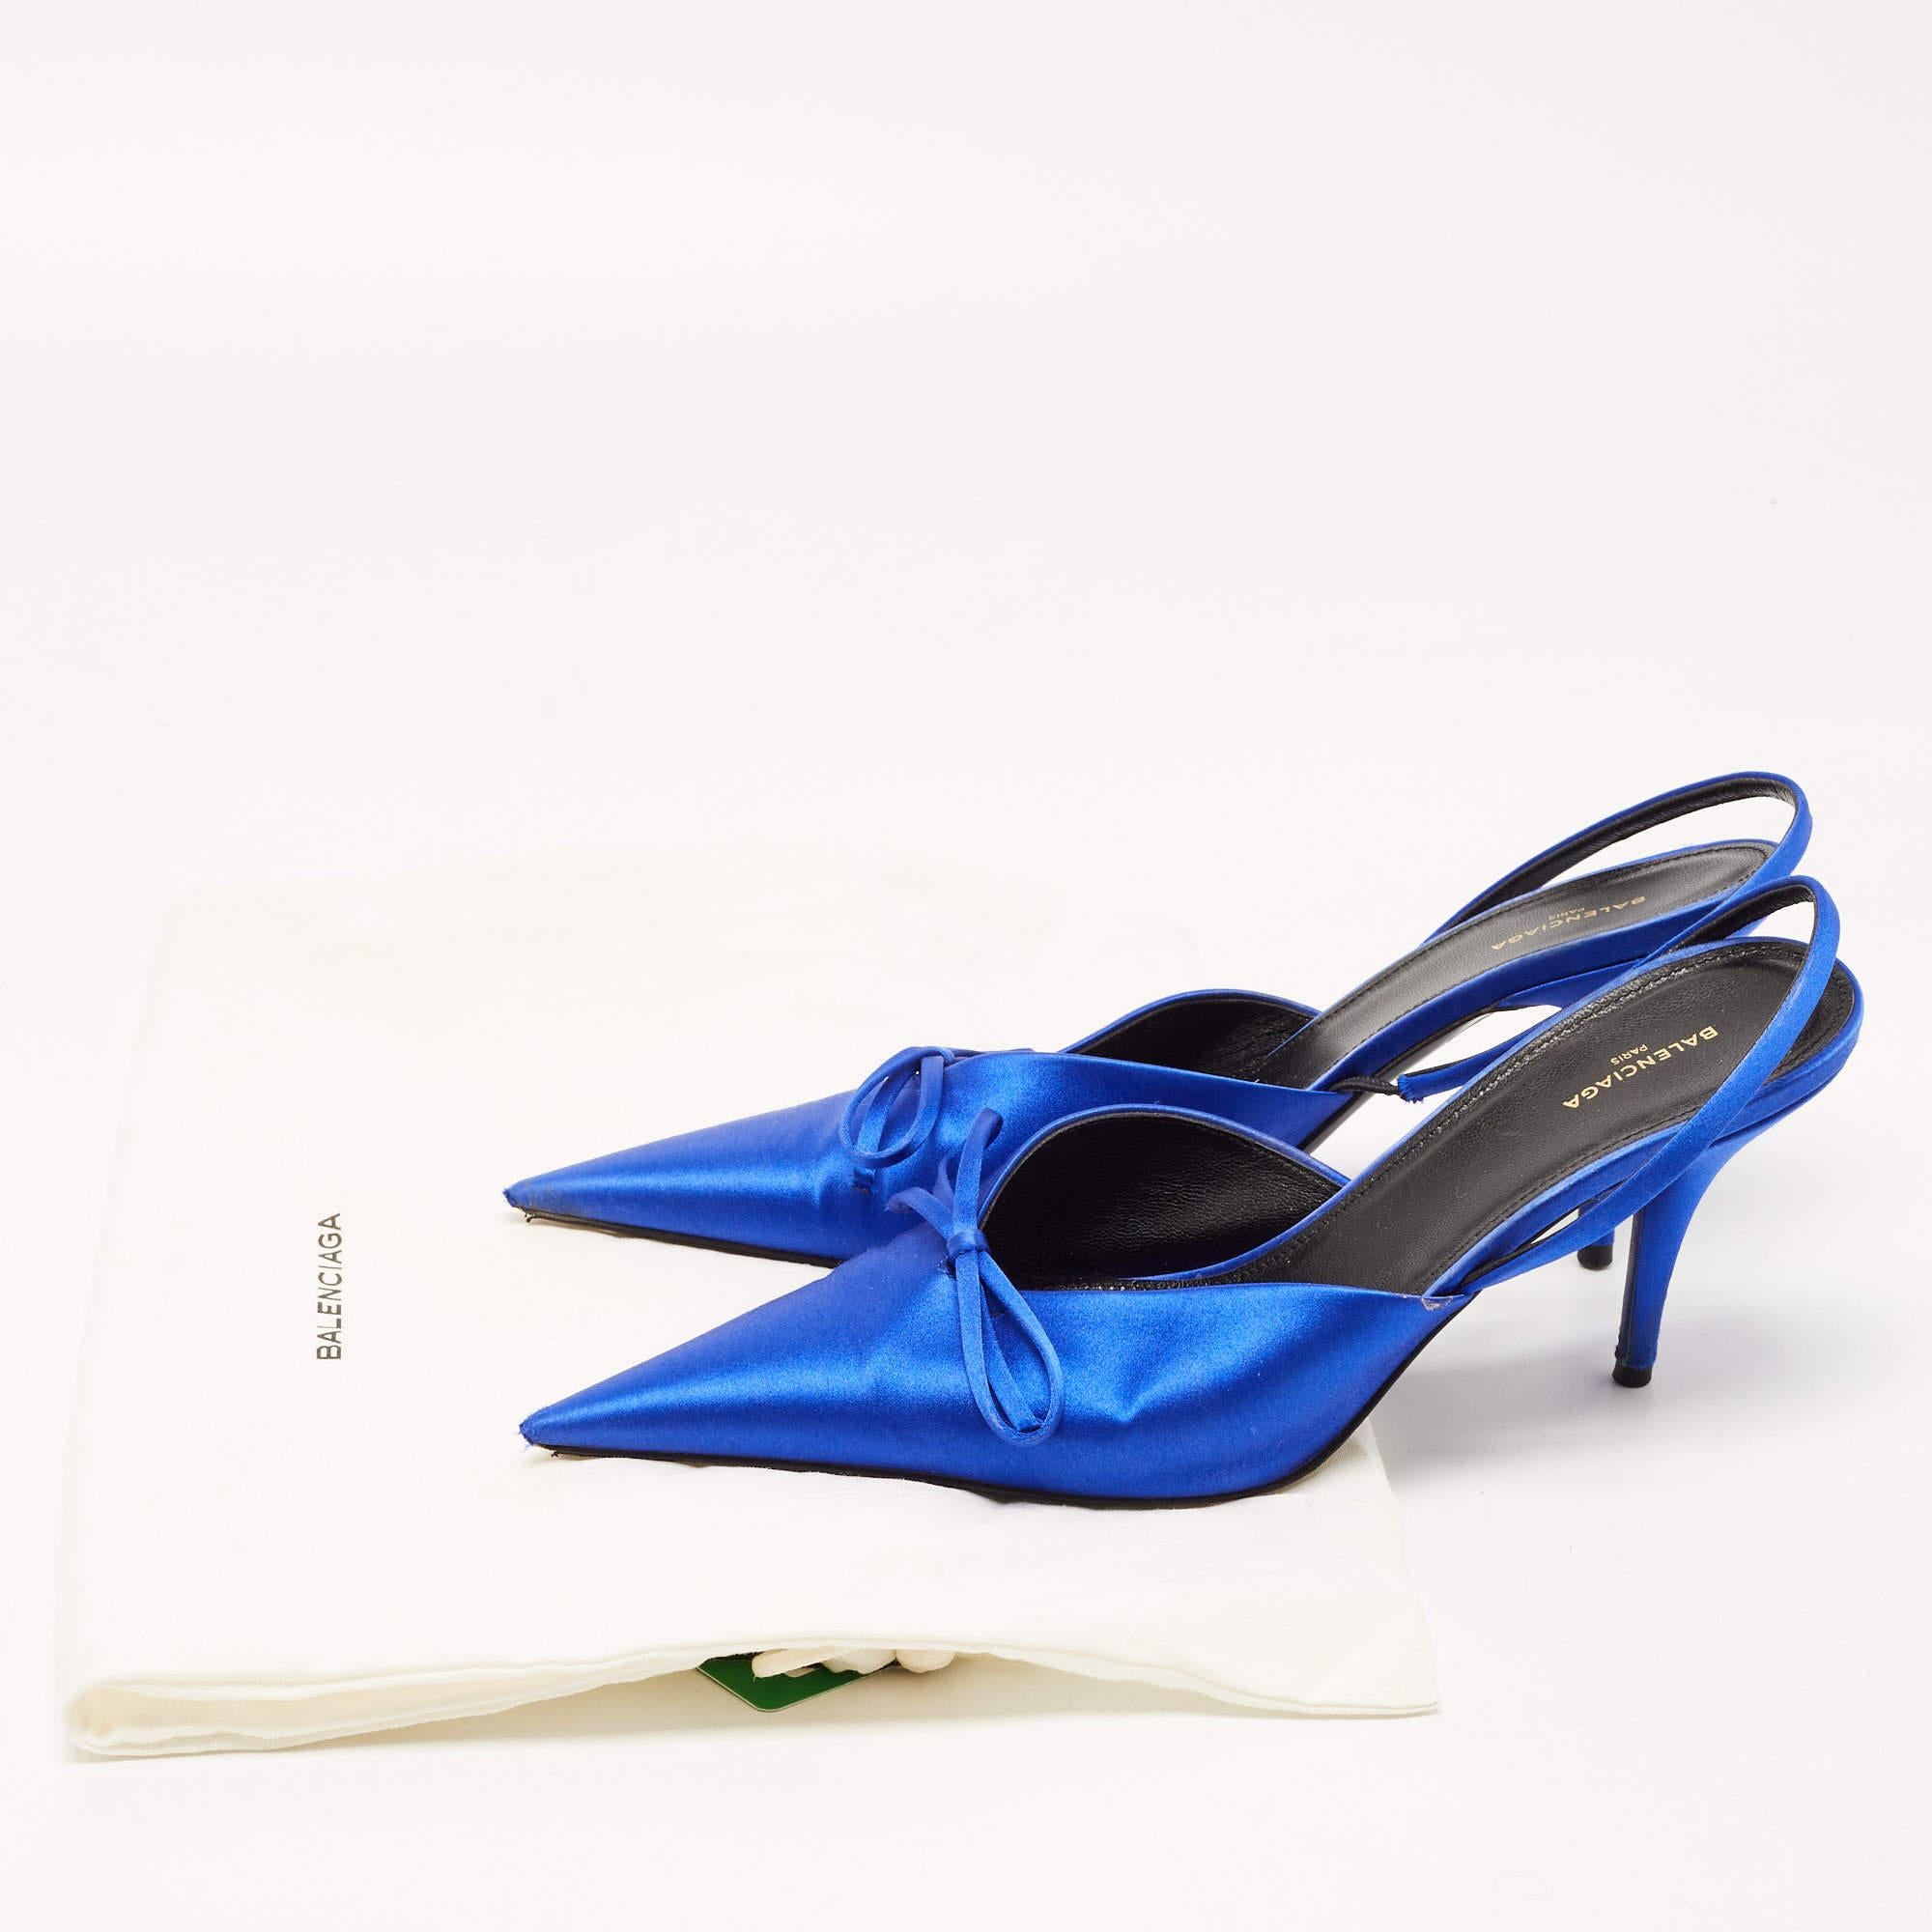 Balenciaga Navy Blue Satin Knife Bow Pointed Toe Slingback Pumps Size 38 For Sale 2